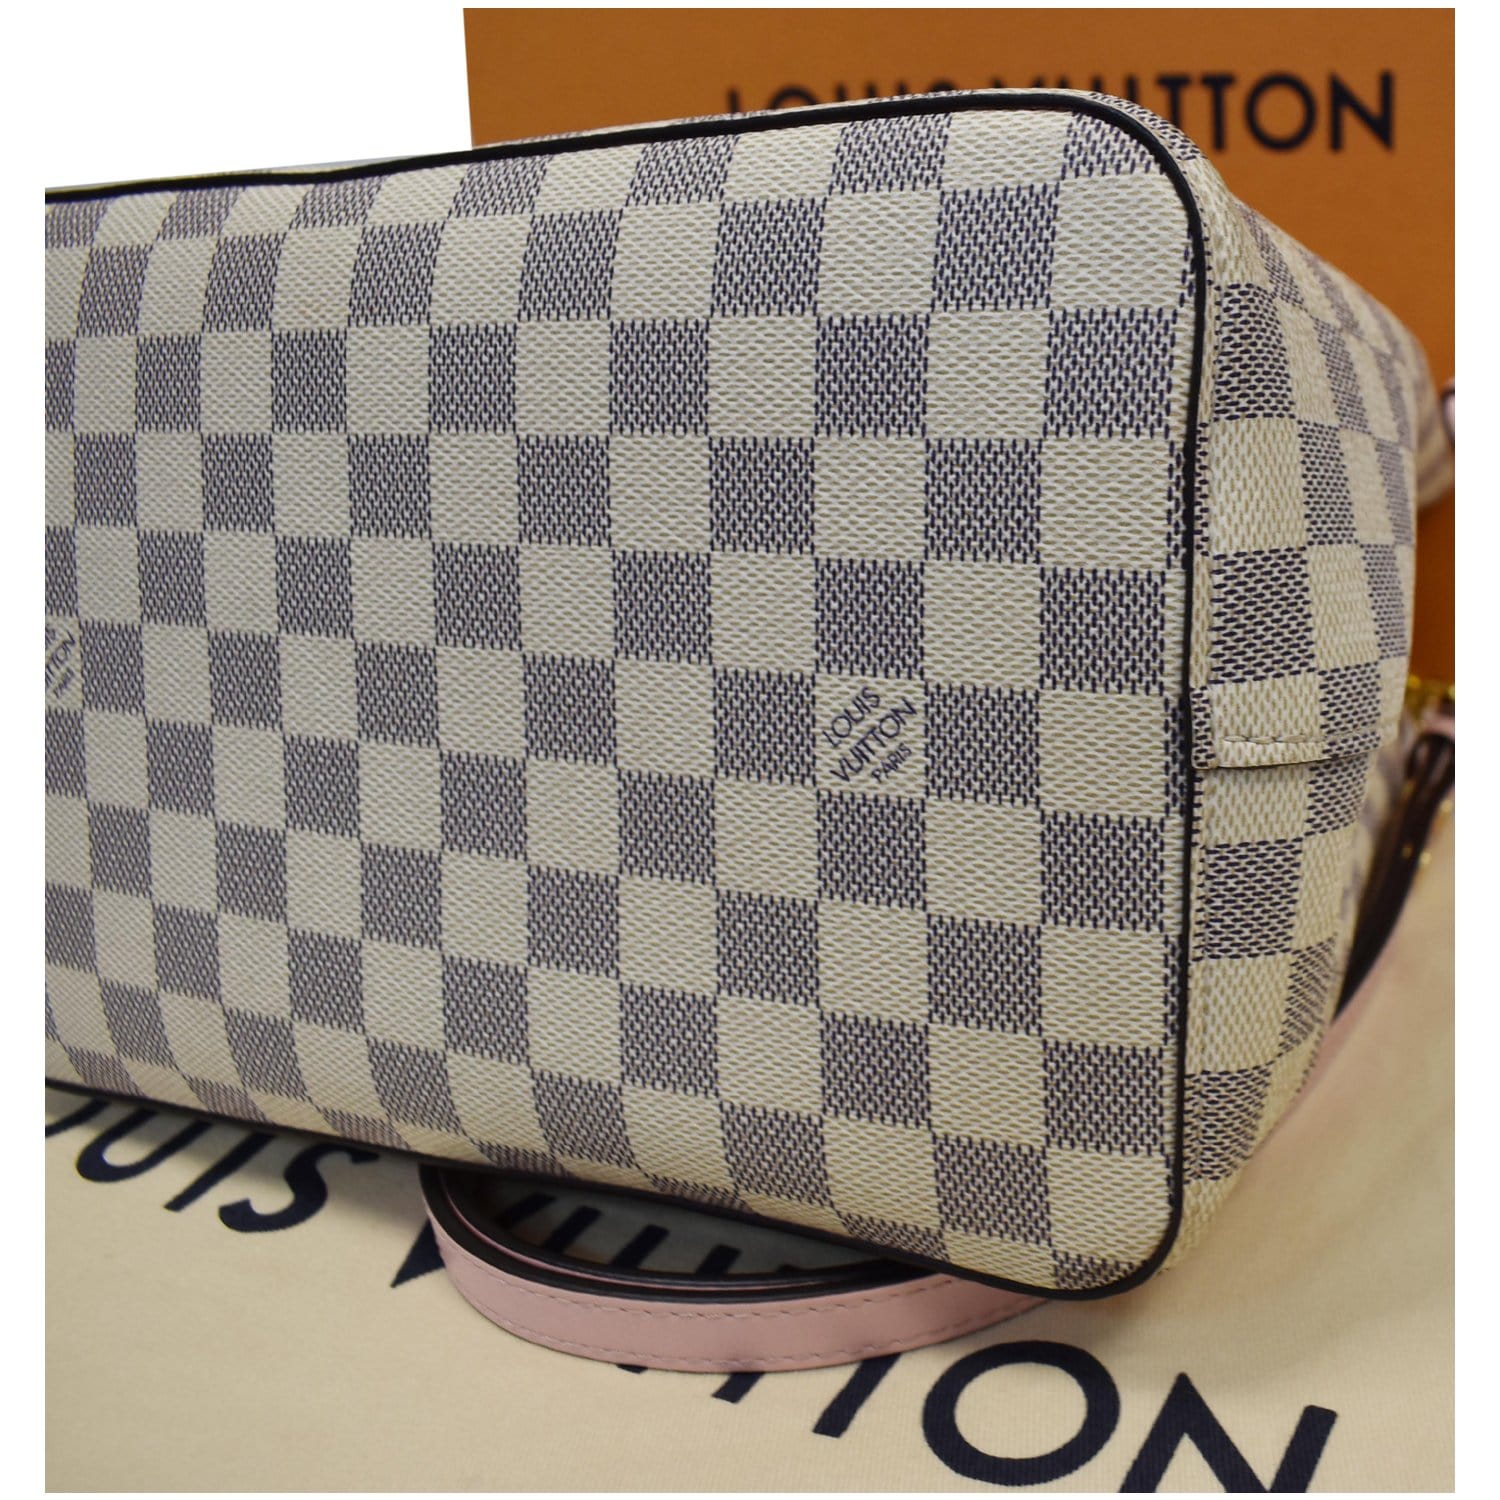 Louis Vuitton Neonoe BB Damier Azur/Pink in Coated Canvas/Leather